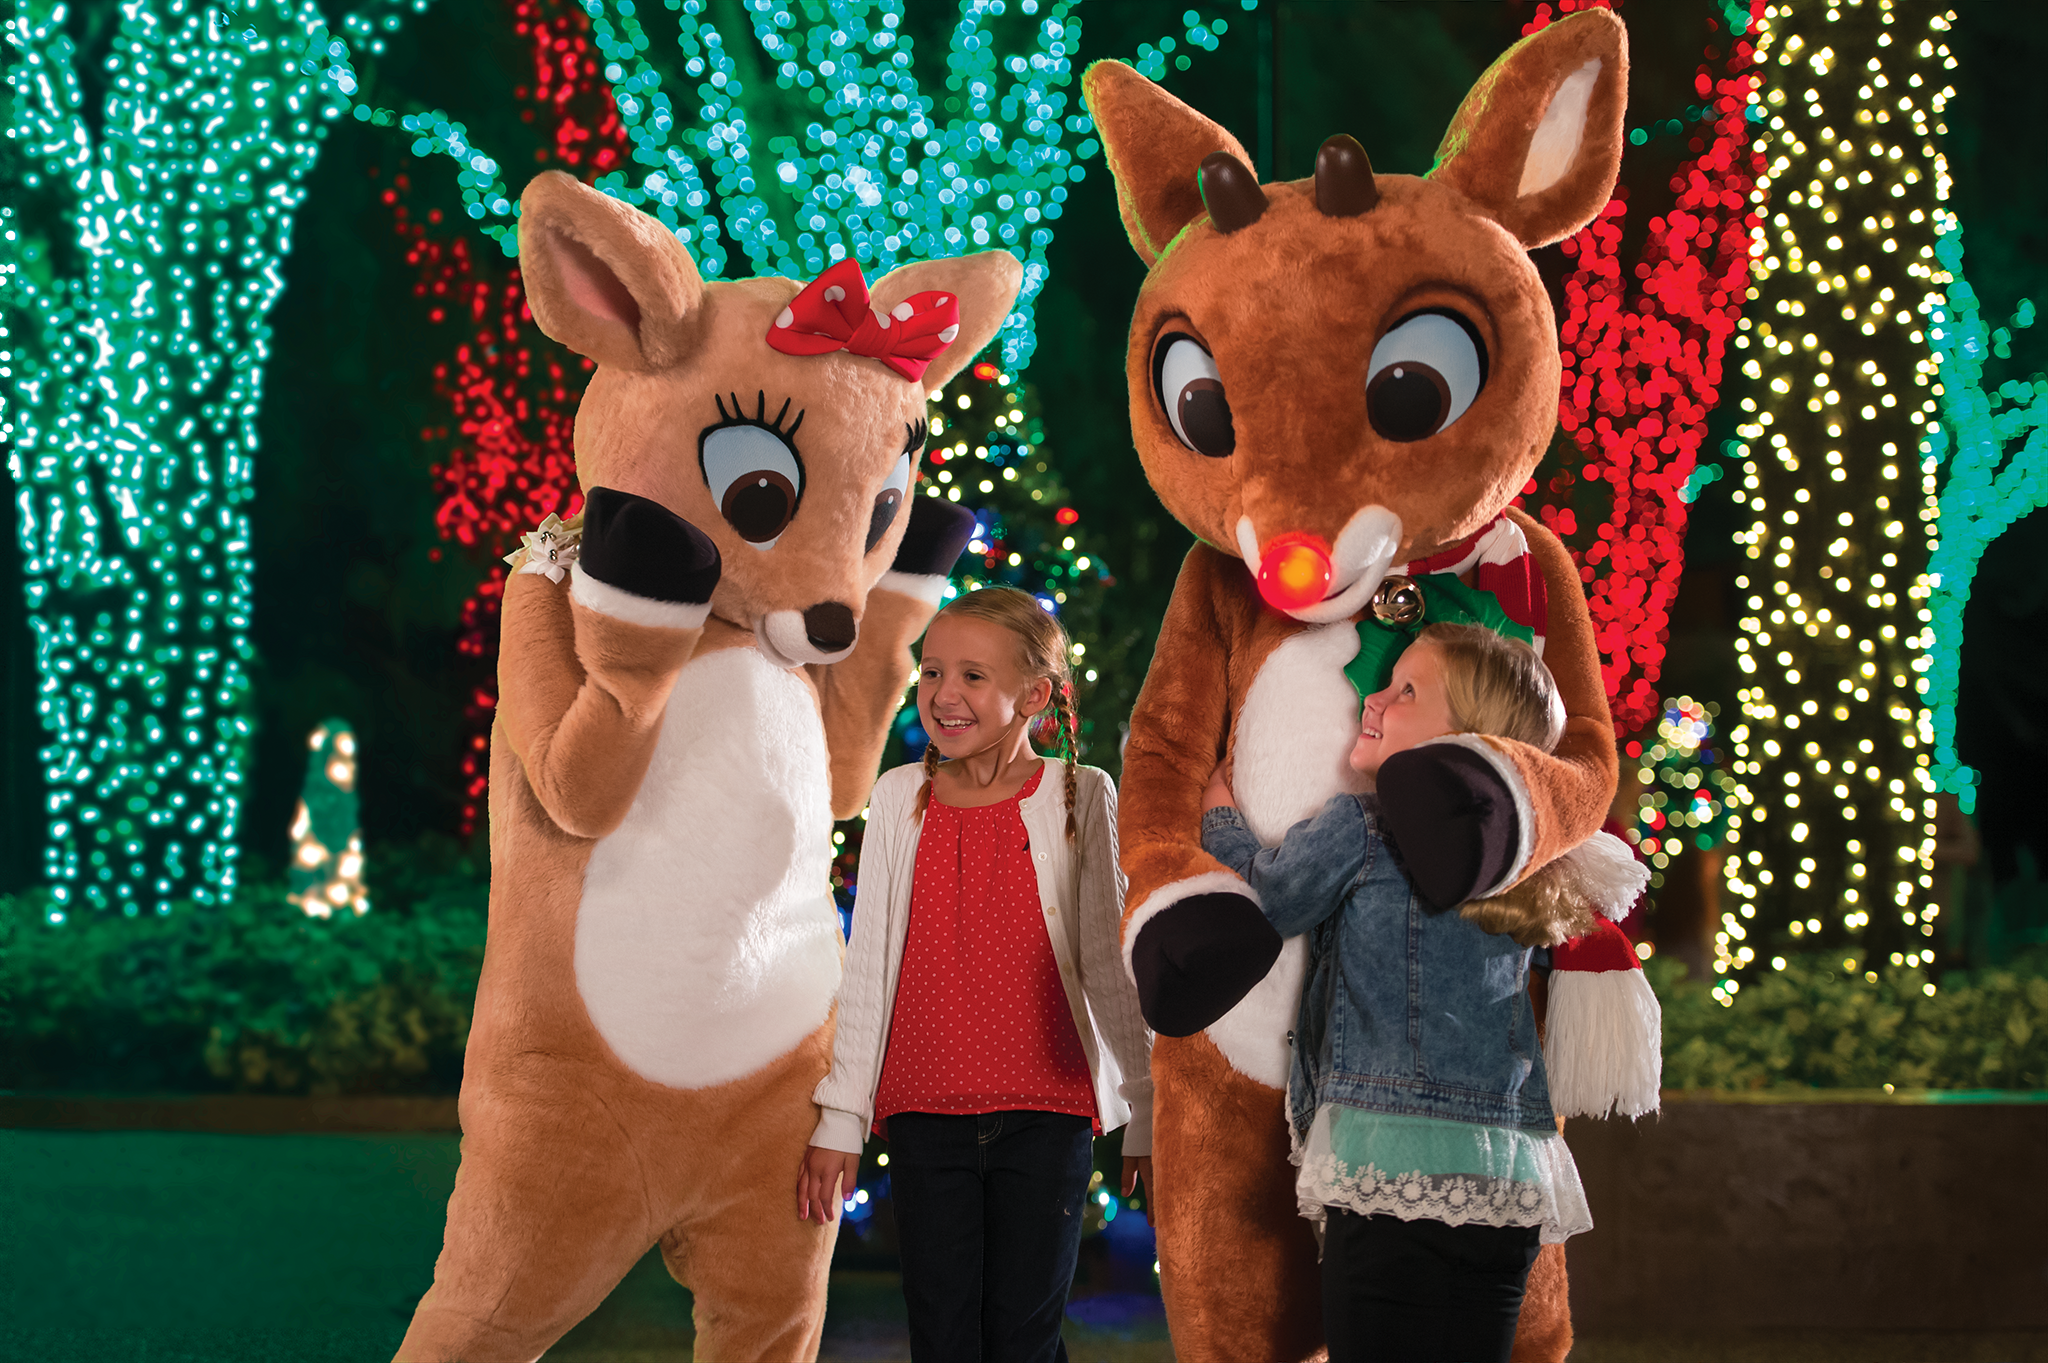 Seaworld’s Christmas Celebration Brightens The Holidays With All-new Meet Rudolph Experience And Returning Classics